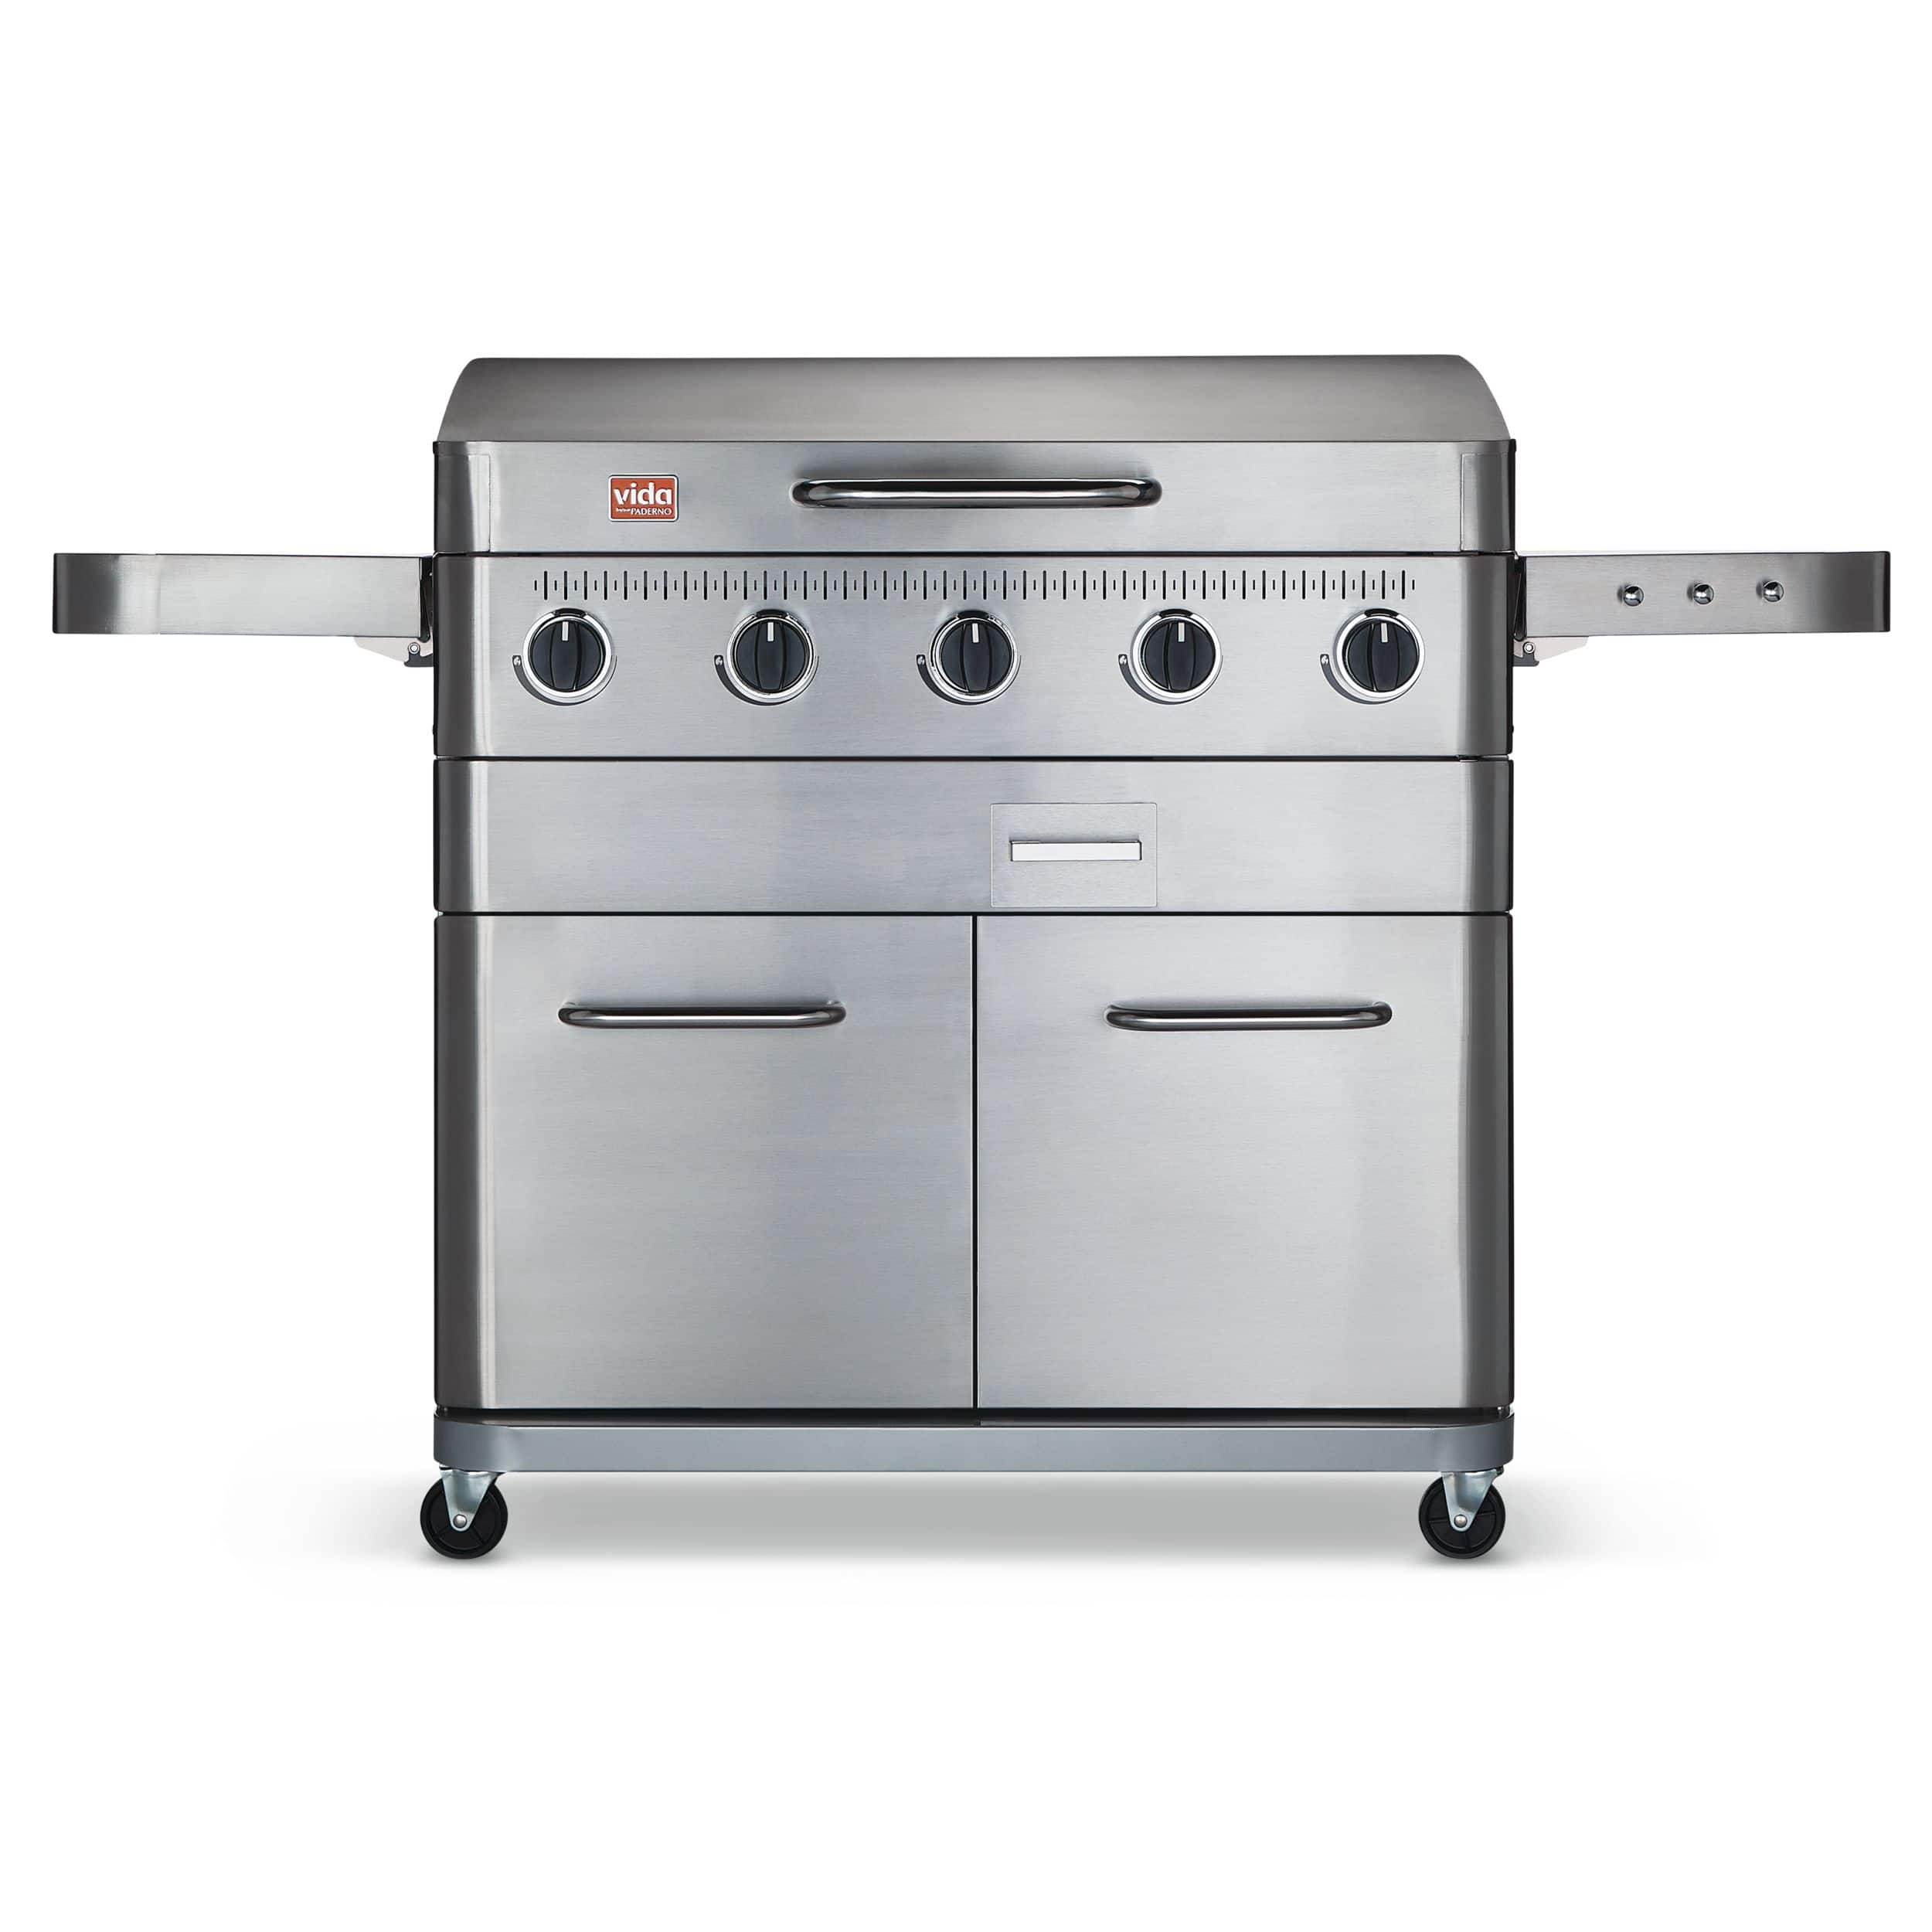 Member's Mark Stainless Steel and Porcelain 5-Burner Gas Grill Review